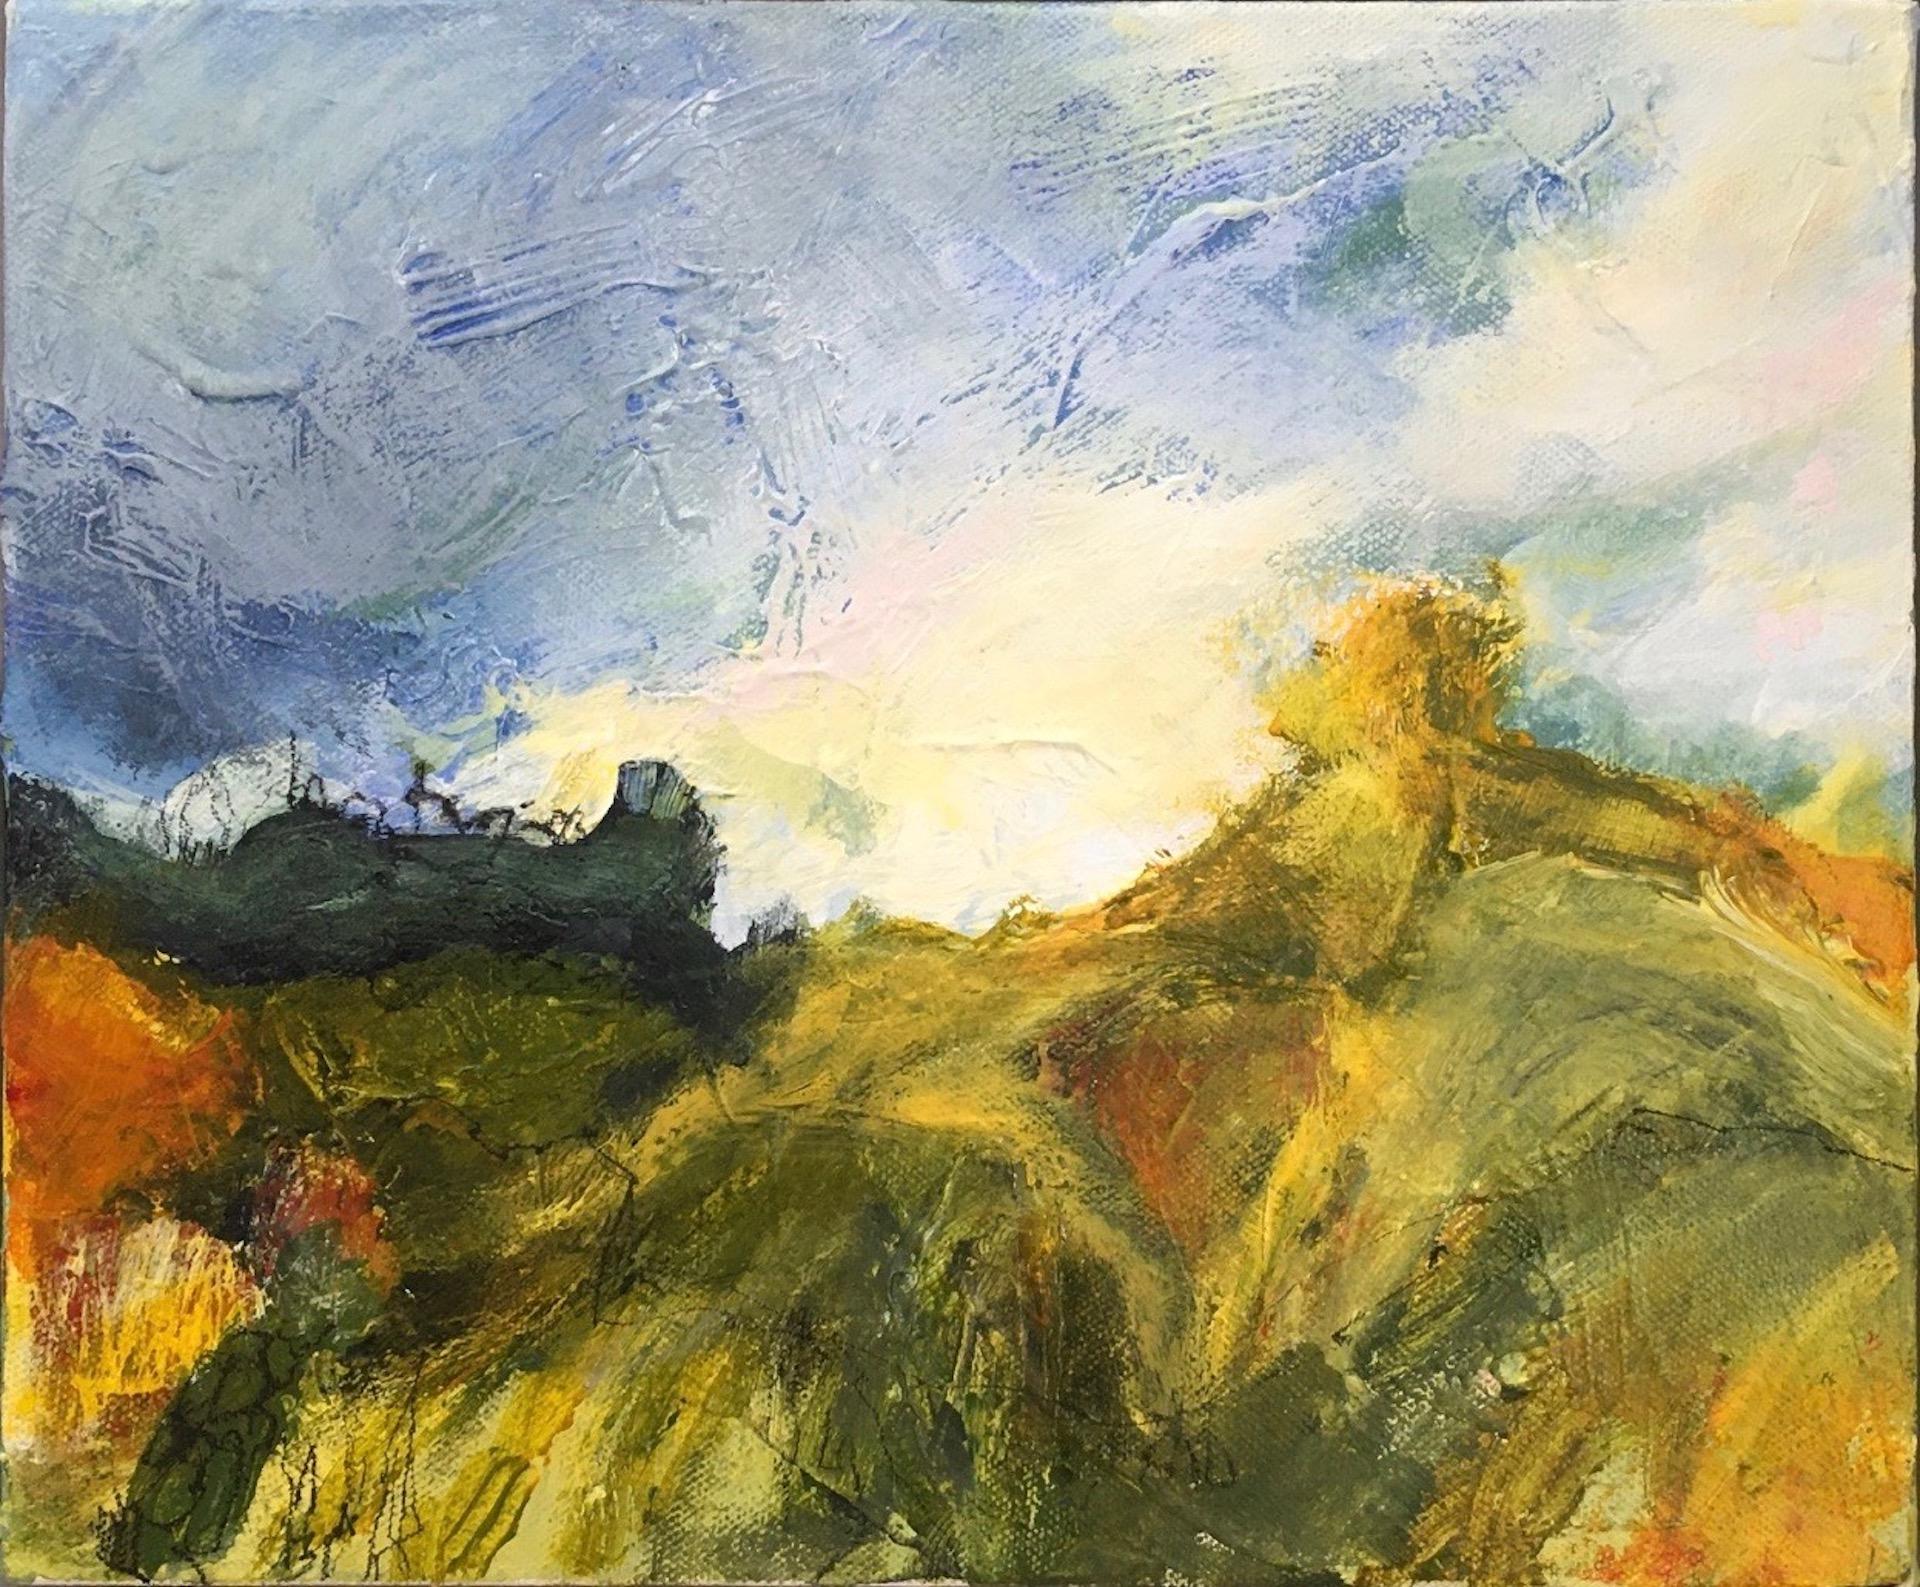 Sarah Russell, The Last Hay Bale, Original Landscape Painting, Affordable Art